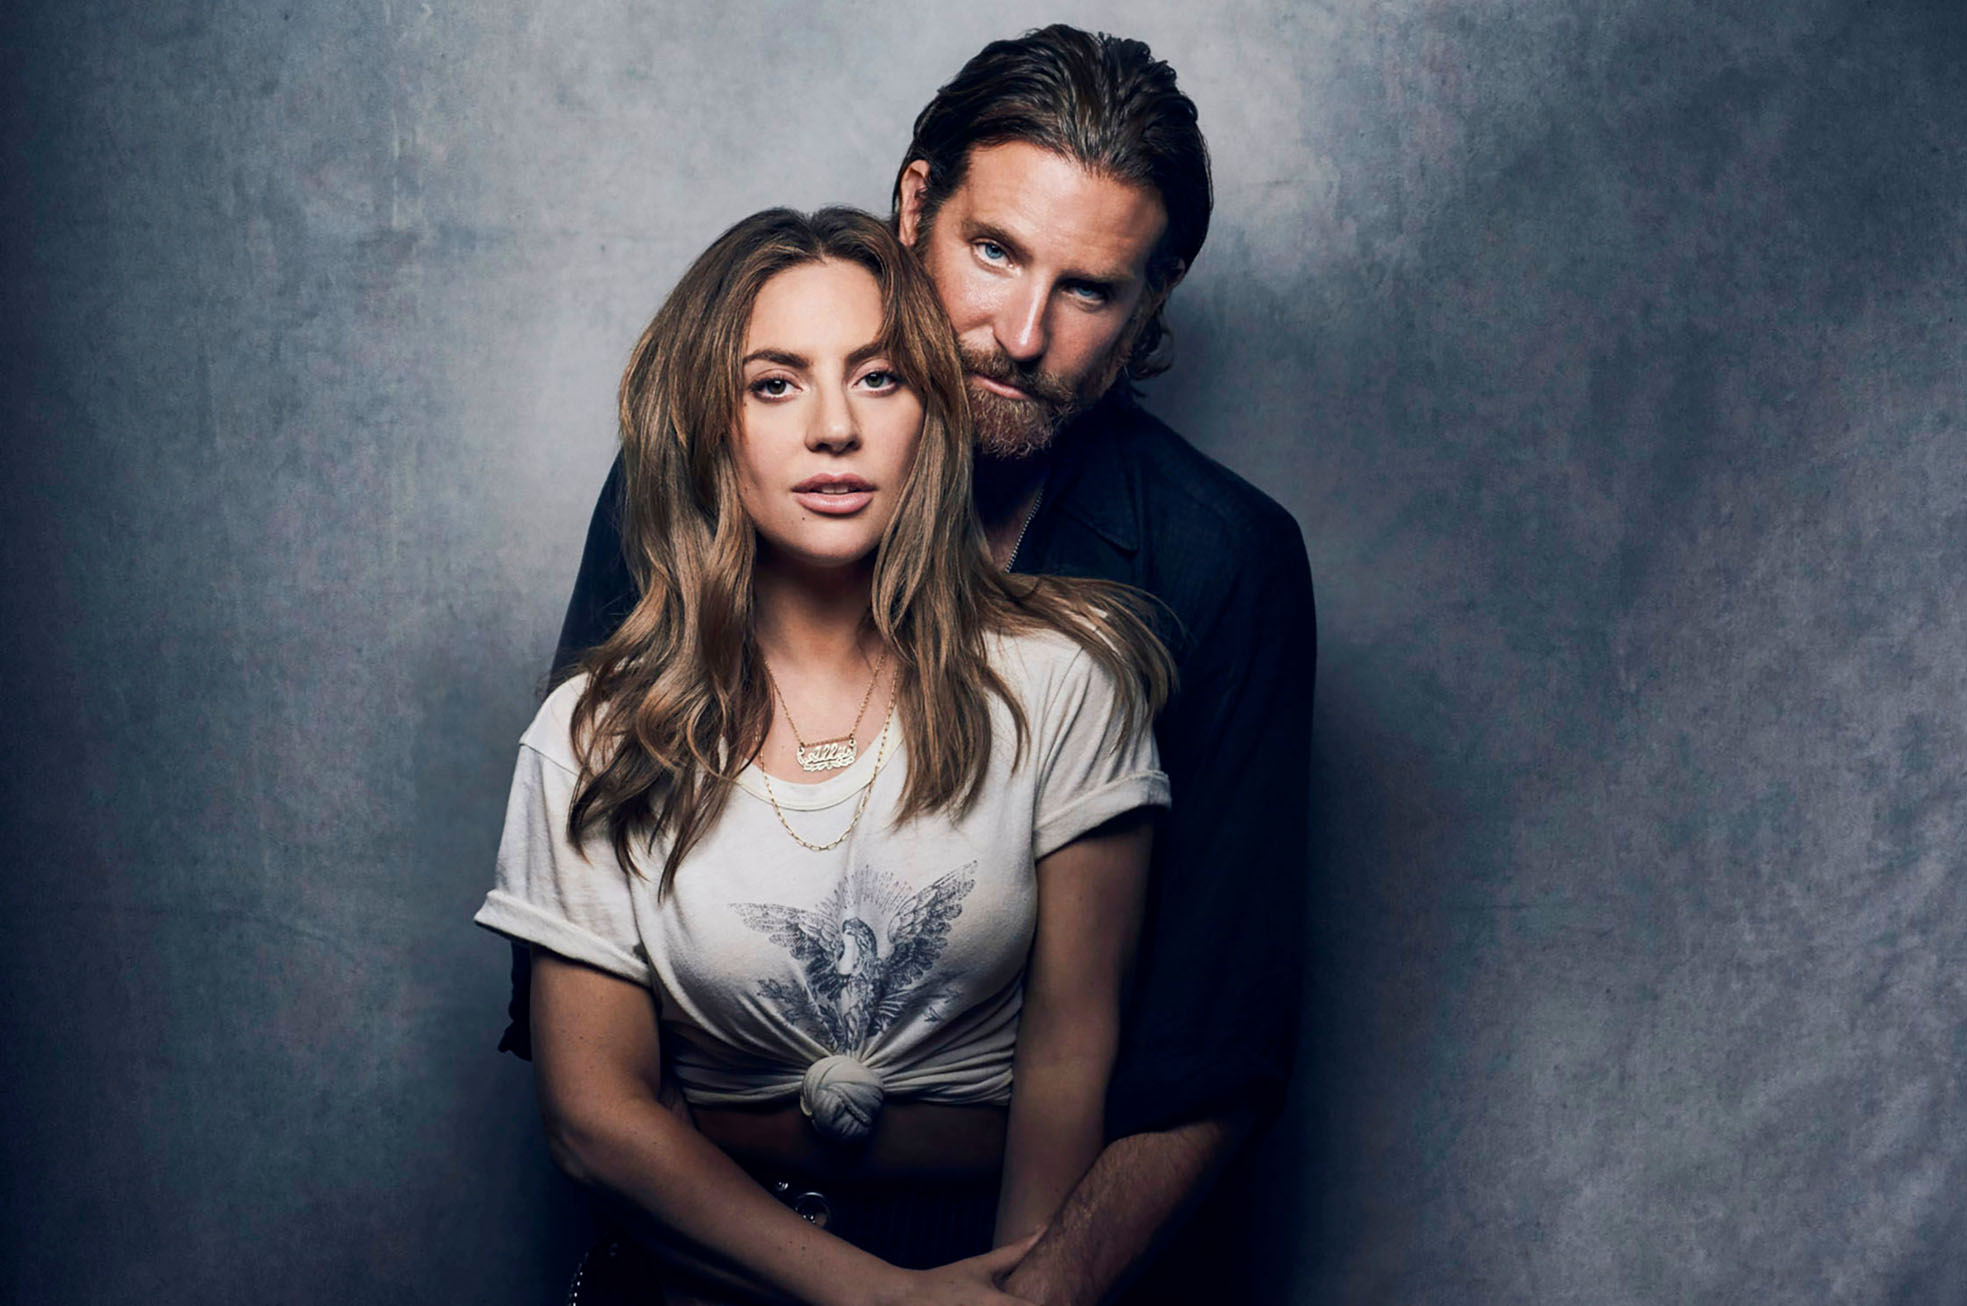 (L-R) LADY GAGA as Ally and director BRADLEY COOPER as Jackson Maine in the Warner Bros. Pictures’ drama "A STAR IS BORN,” a Warner Bros. Pictures release. 
Photo by Peter Lindbergh